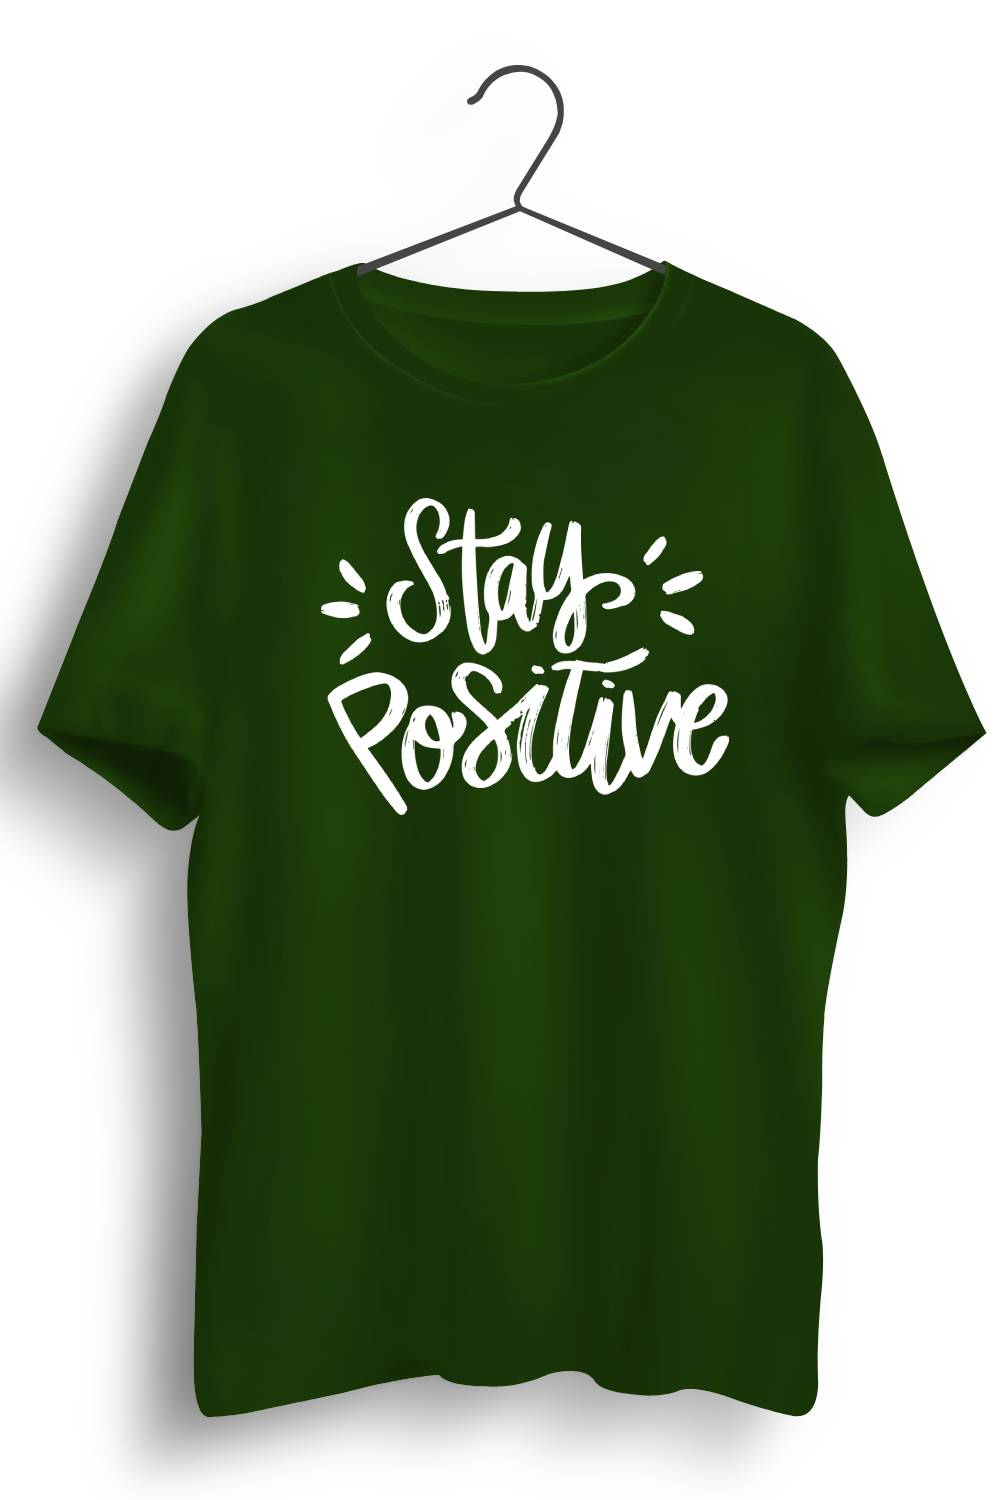 Stay Positive Graphic Printed Green Tshirt